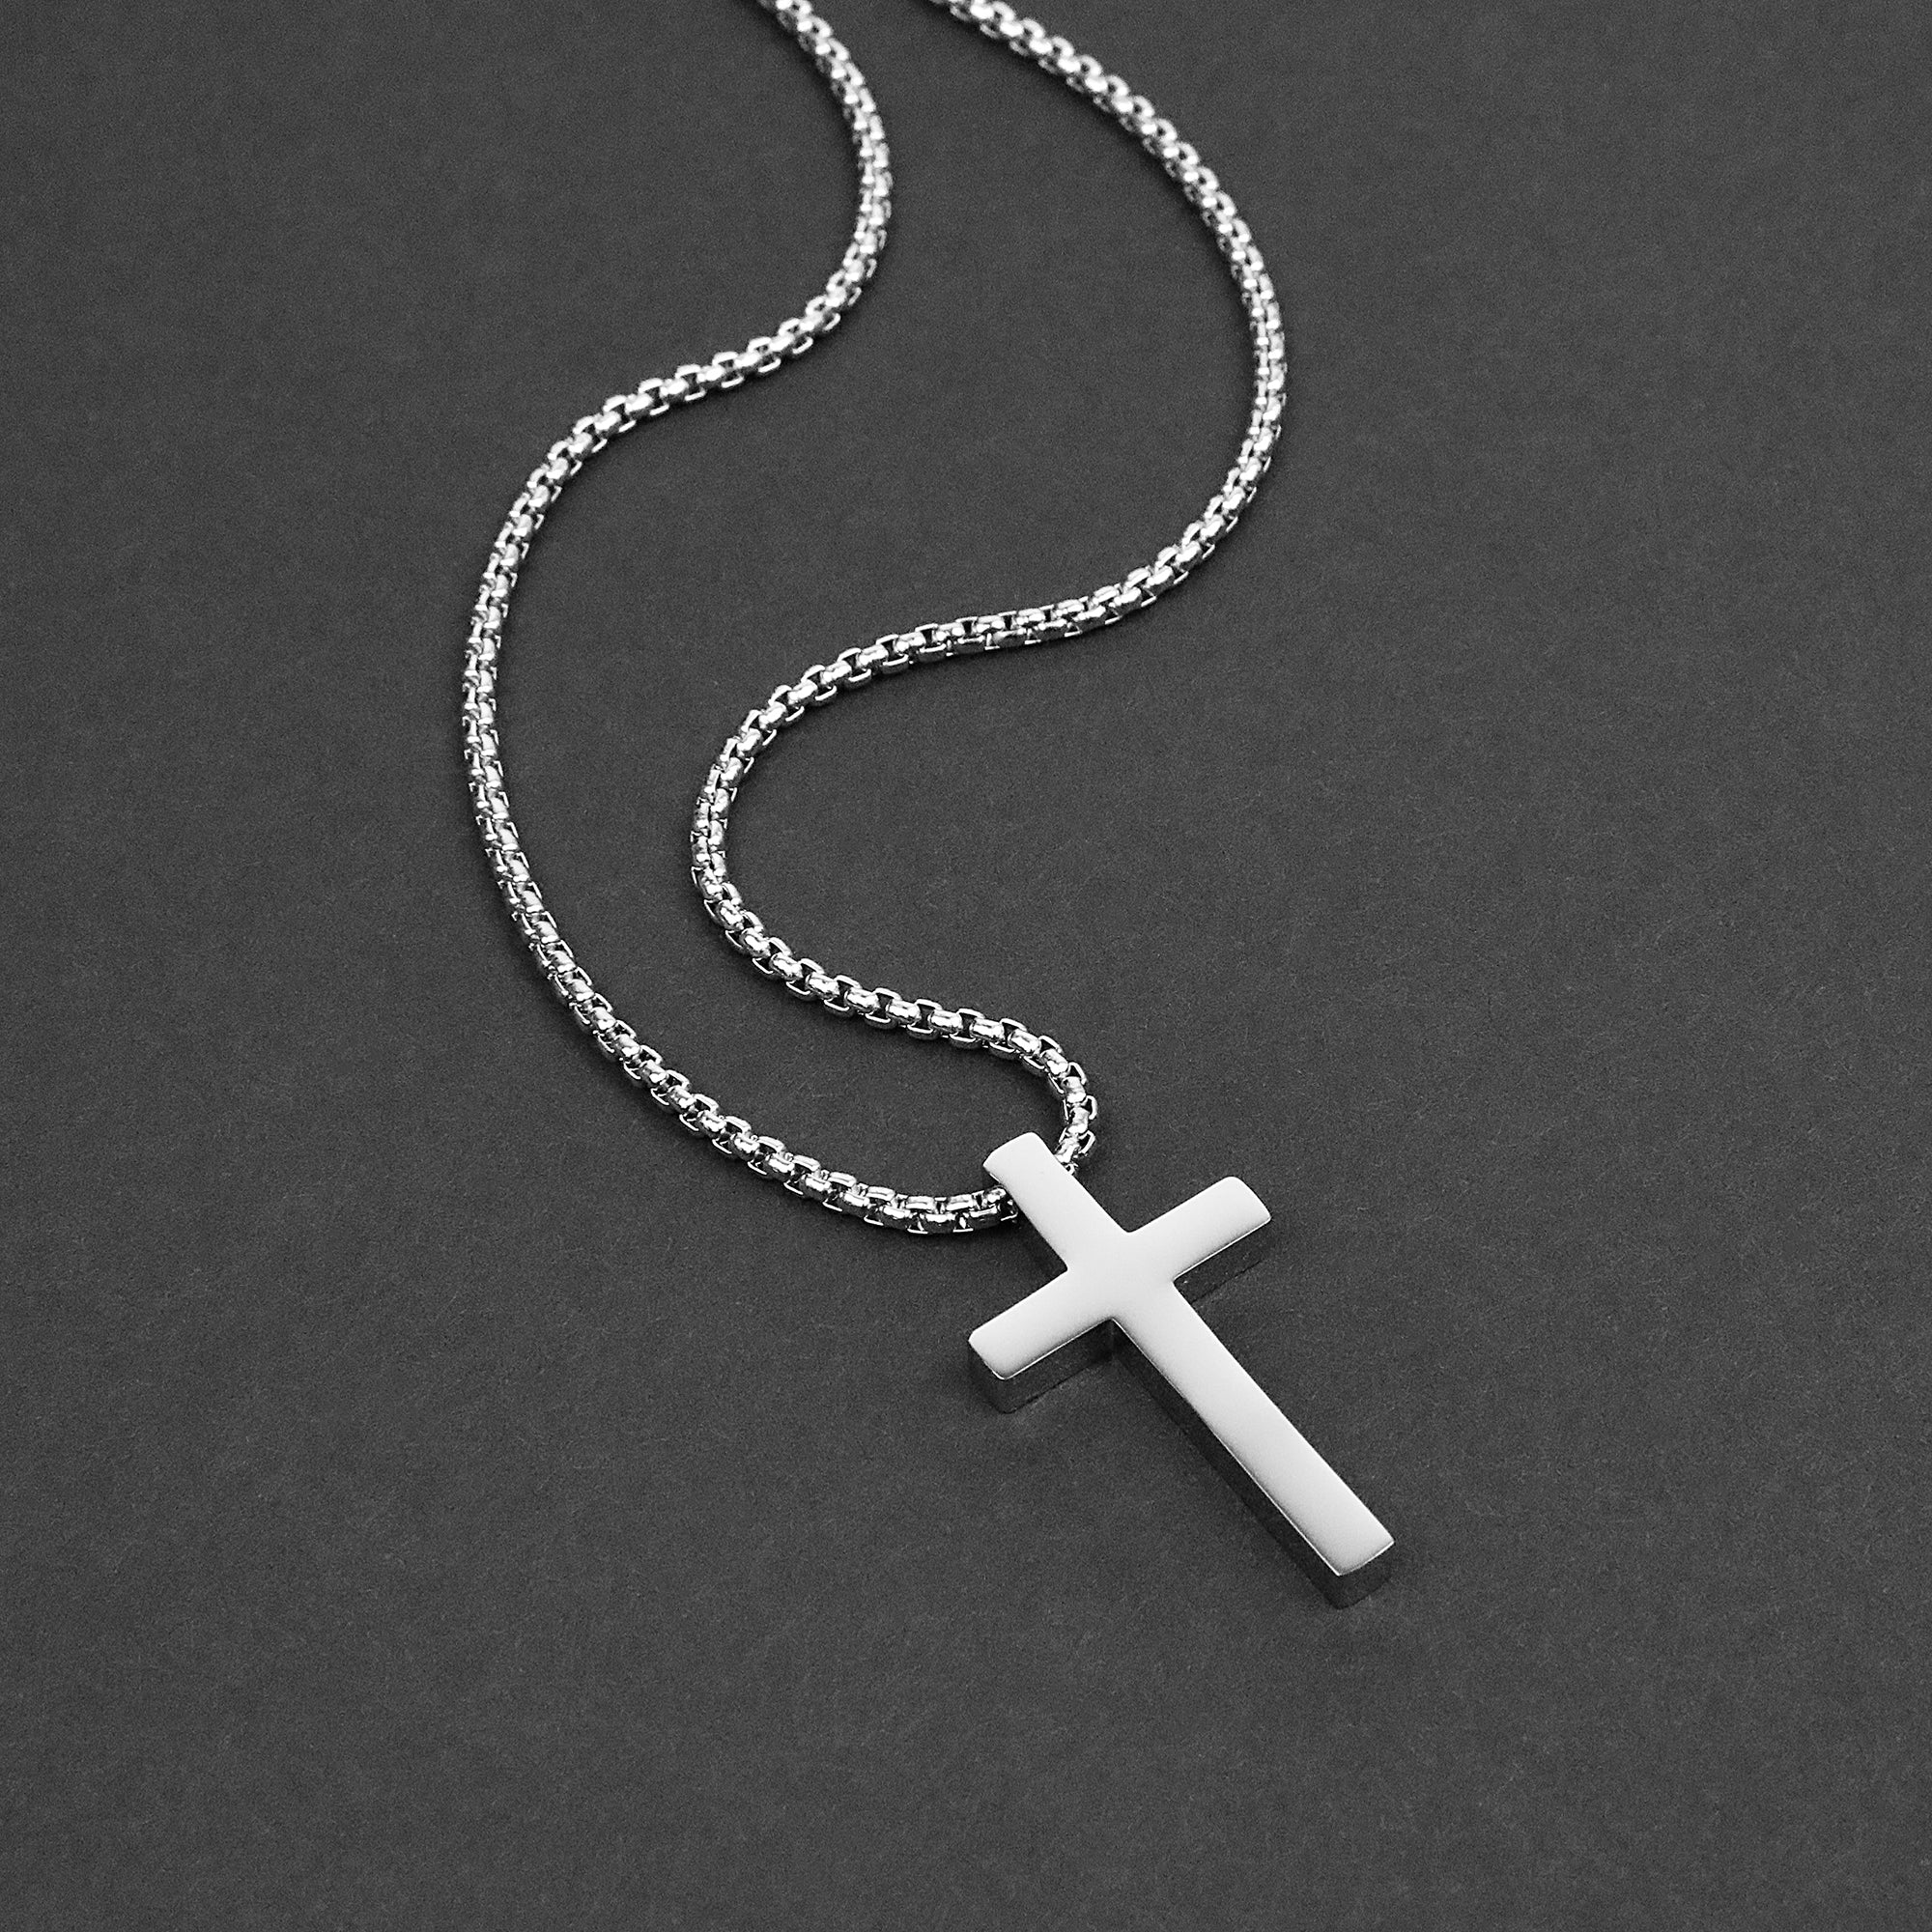 Silver Cross Pendant Necklace Stainless Steel Mens Curb Cuban Chain Gift  16-36